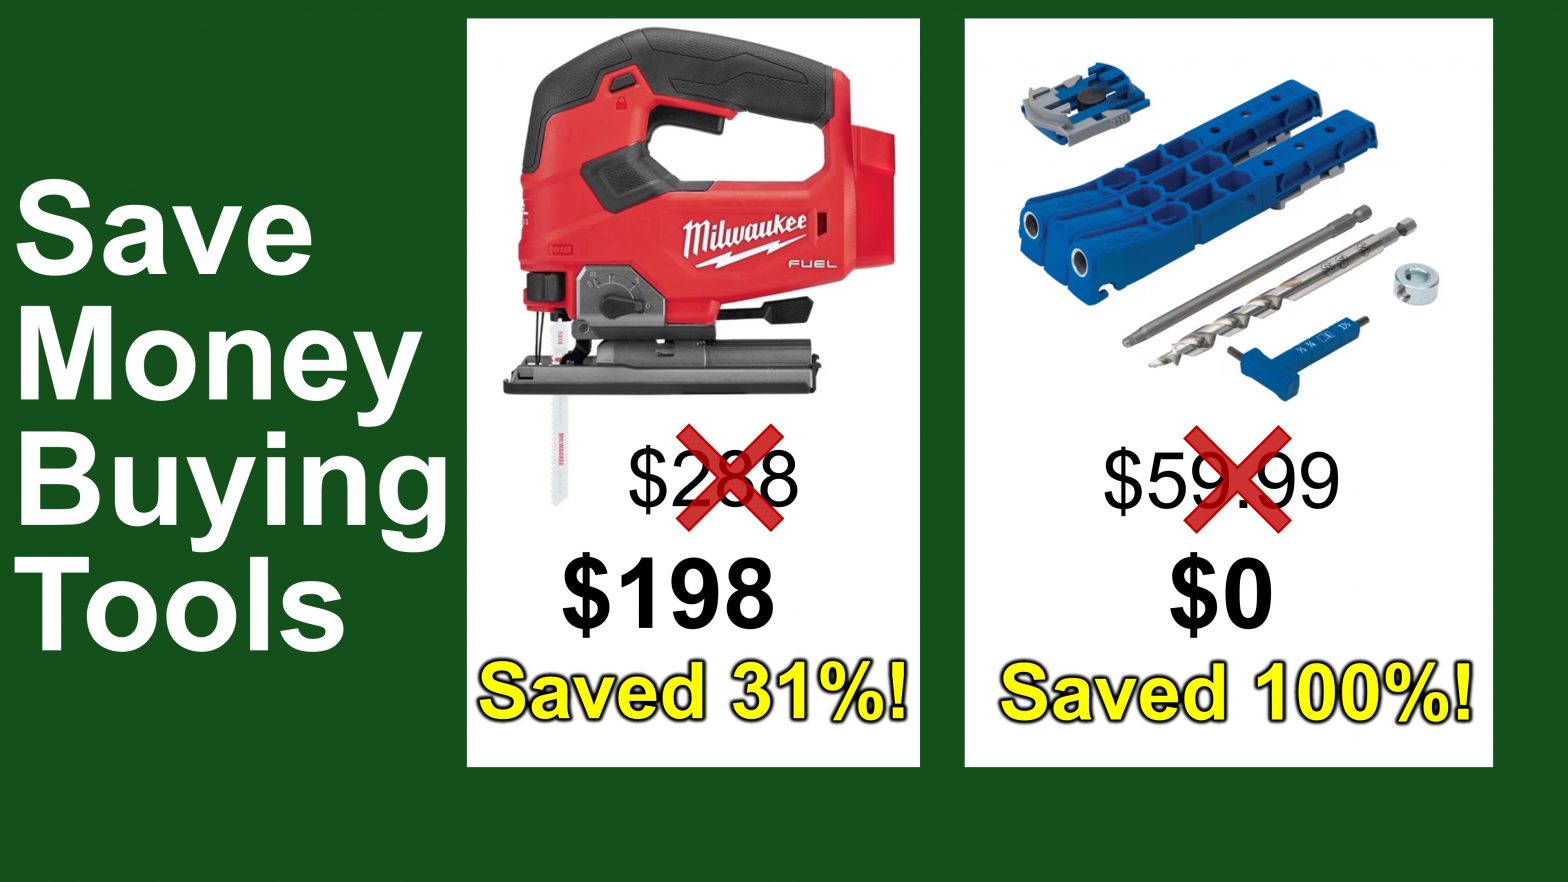 7 Ways to Save Big $$$ When Buying Tools for DIY Projects; They could be FREE!